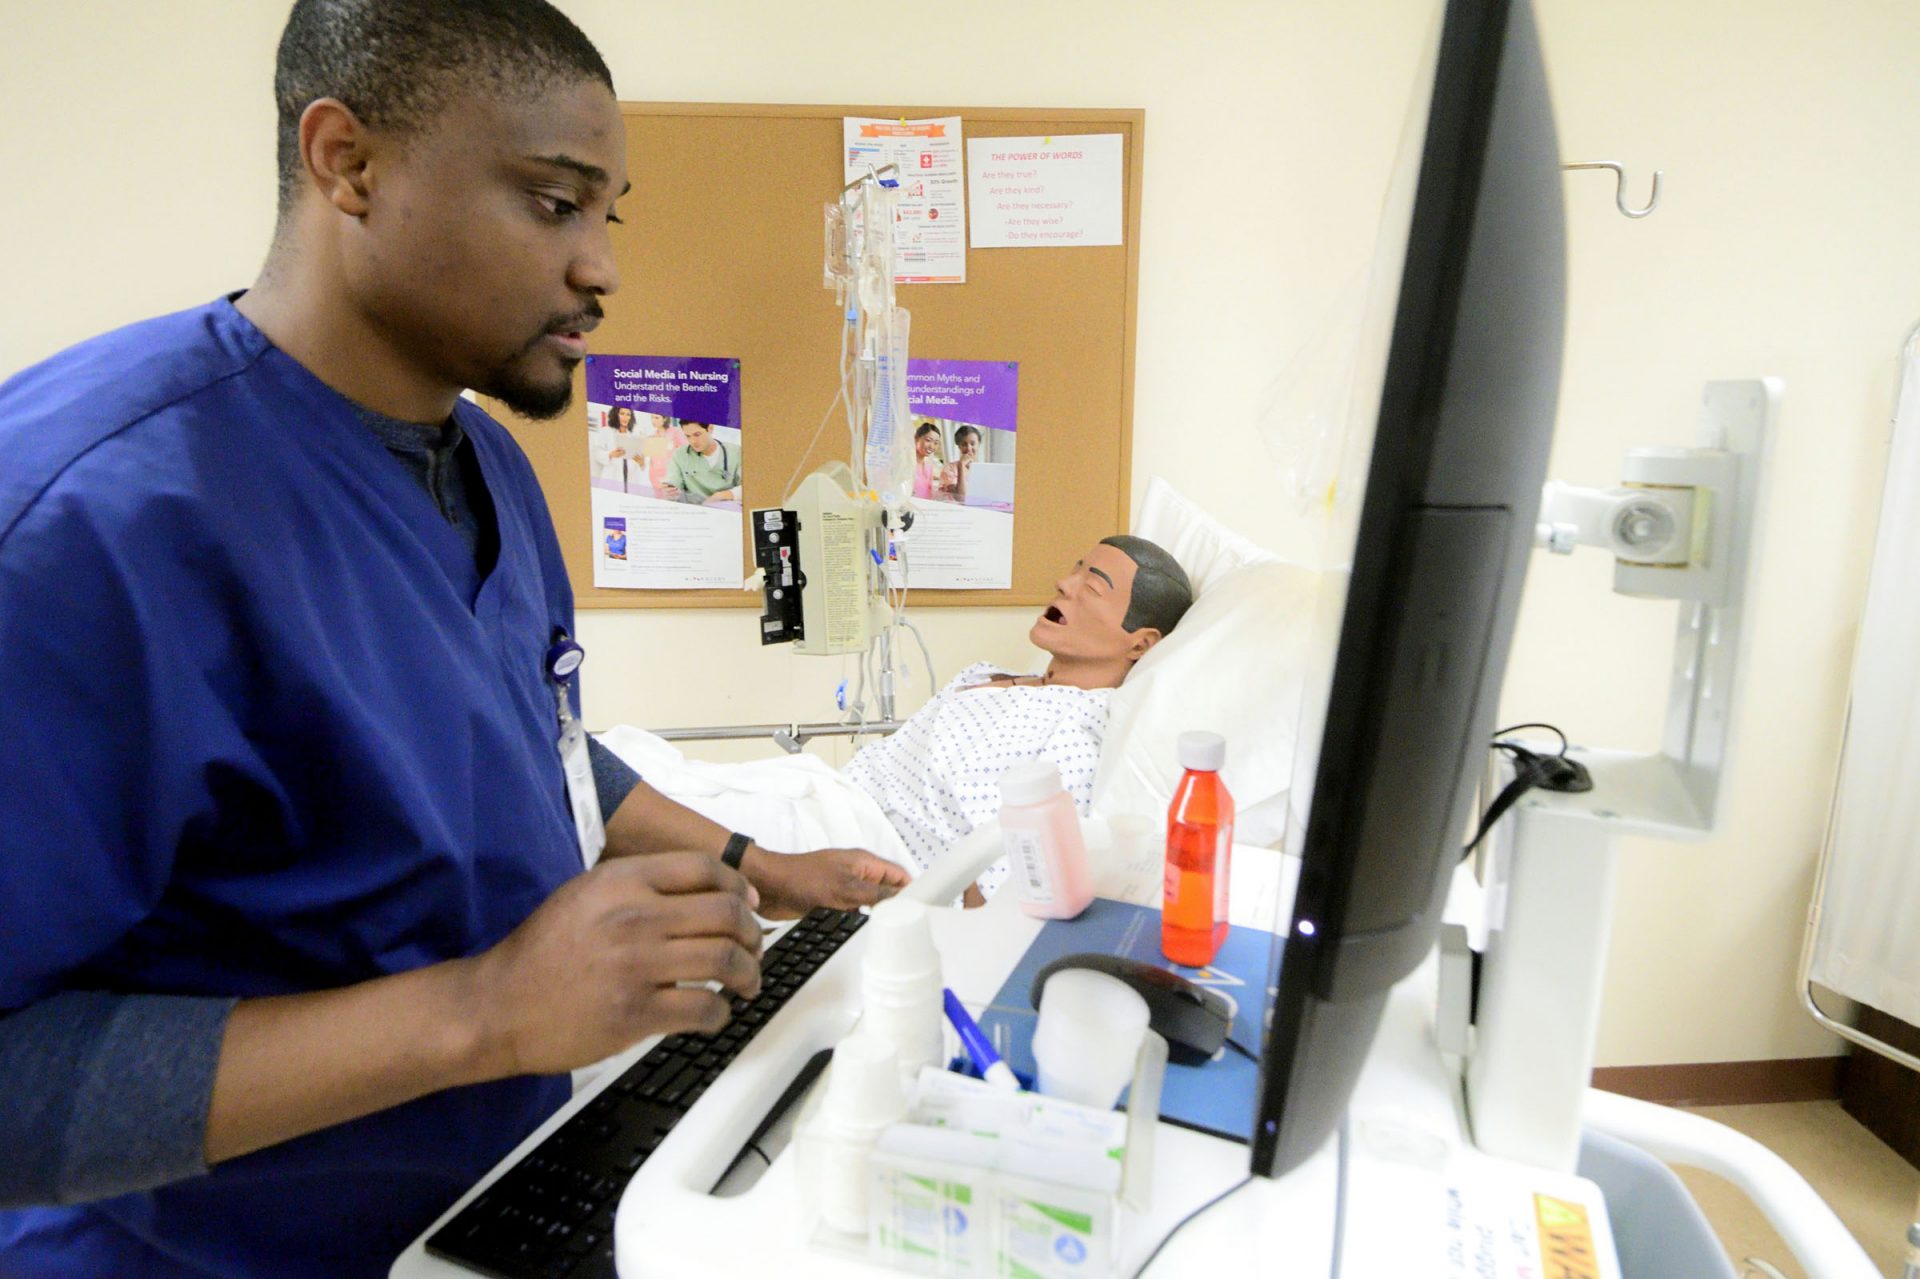 Chukwuka Asakwe attends to a mannequin in a training situation of the Delaware County Technical School Practical Nursing Program, in Broomall, Pa.